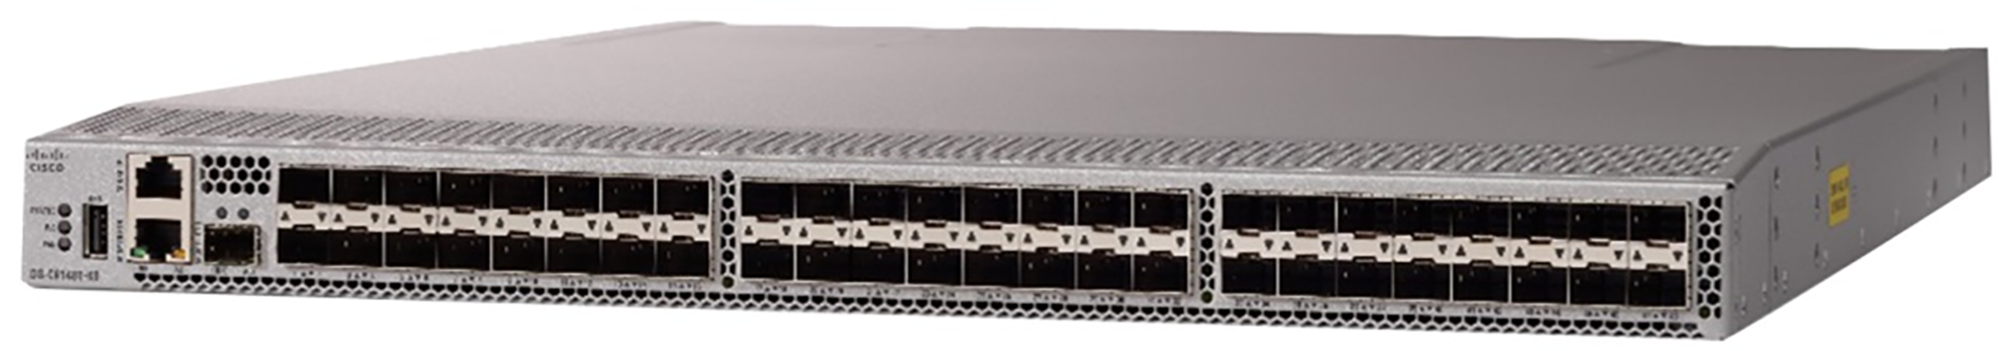 Cisco MDS 9148T 32-Gbps 48-Port fibre channel switch